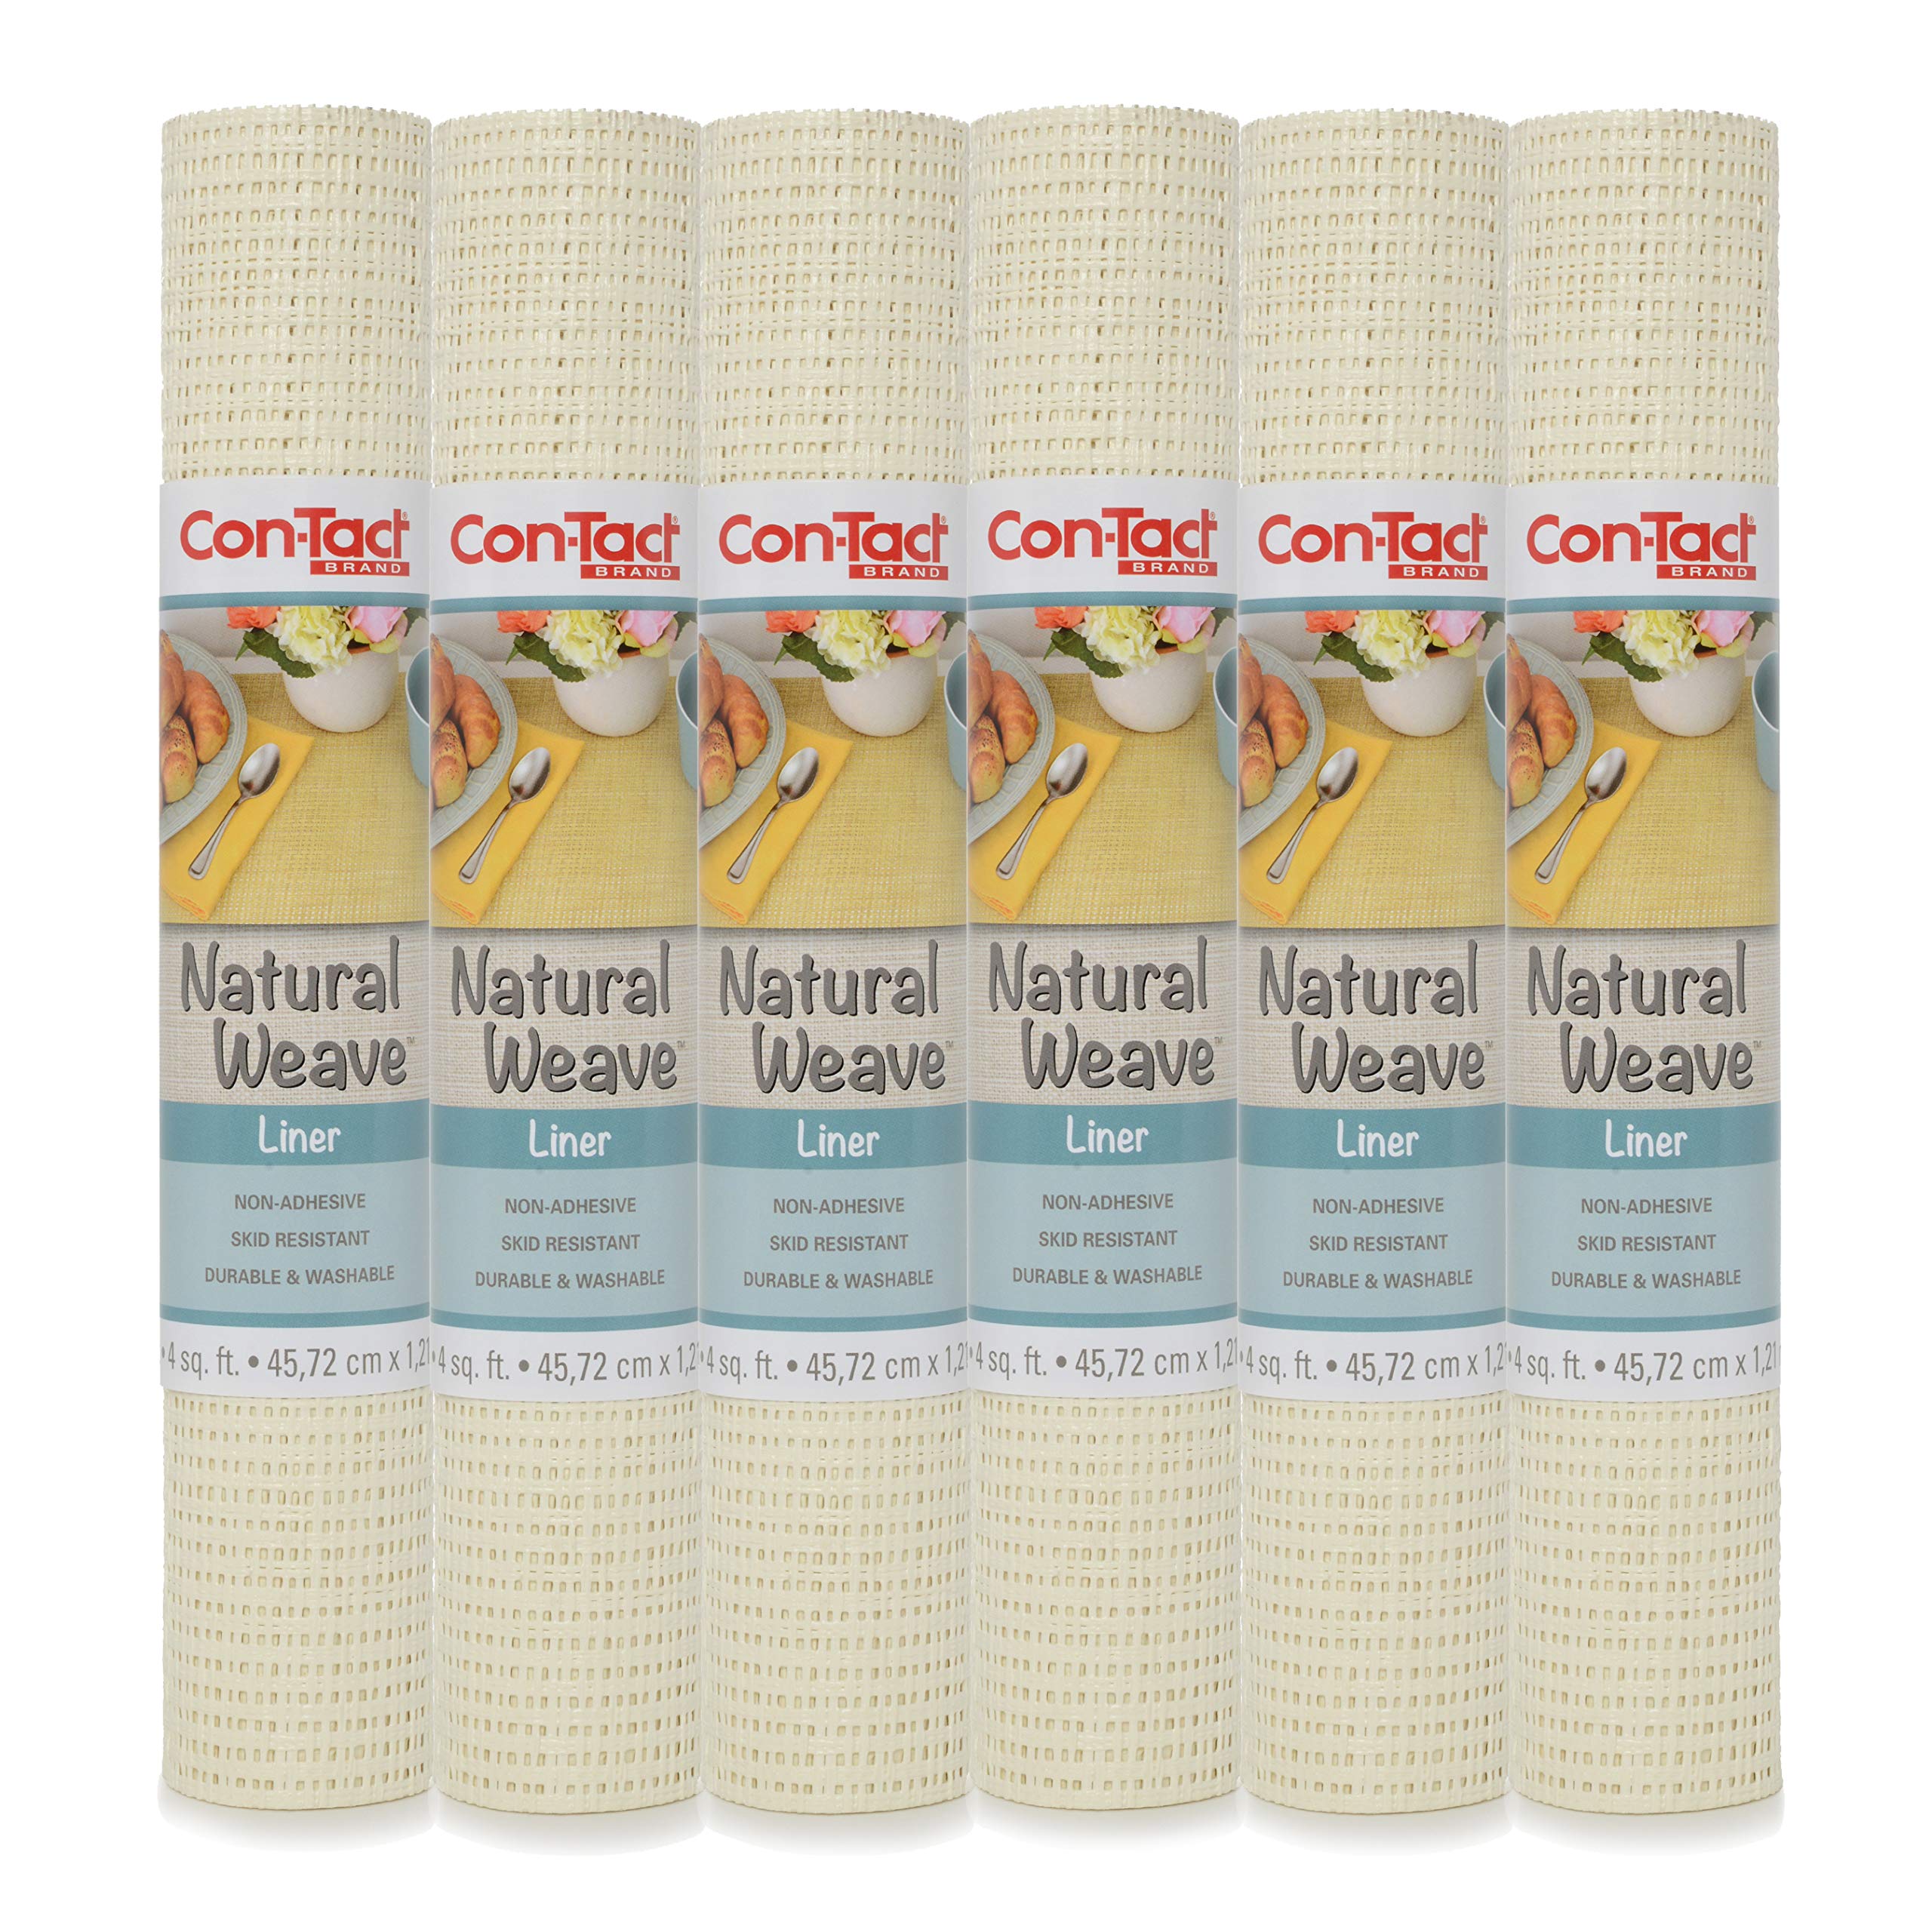 Con-Tact Brand Natural Weave Shelf Liner, Non-Adhesive and Skid-Resistant Contact Drawer Liner, 12" x 4', Lattice White, 6 Rolls